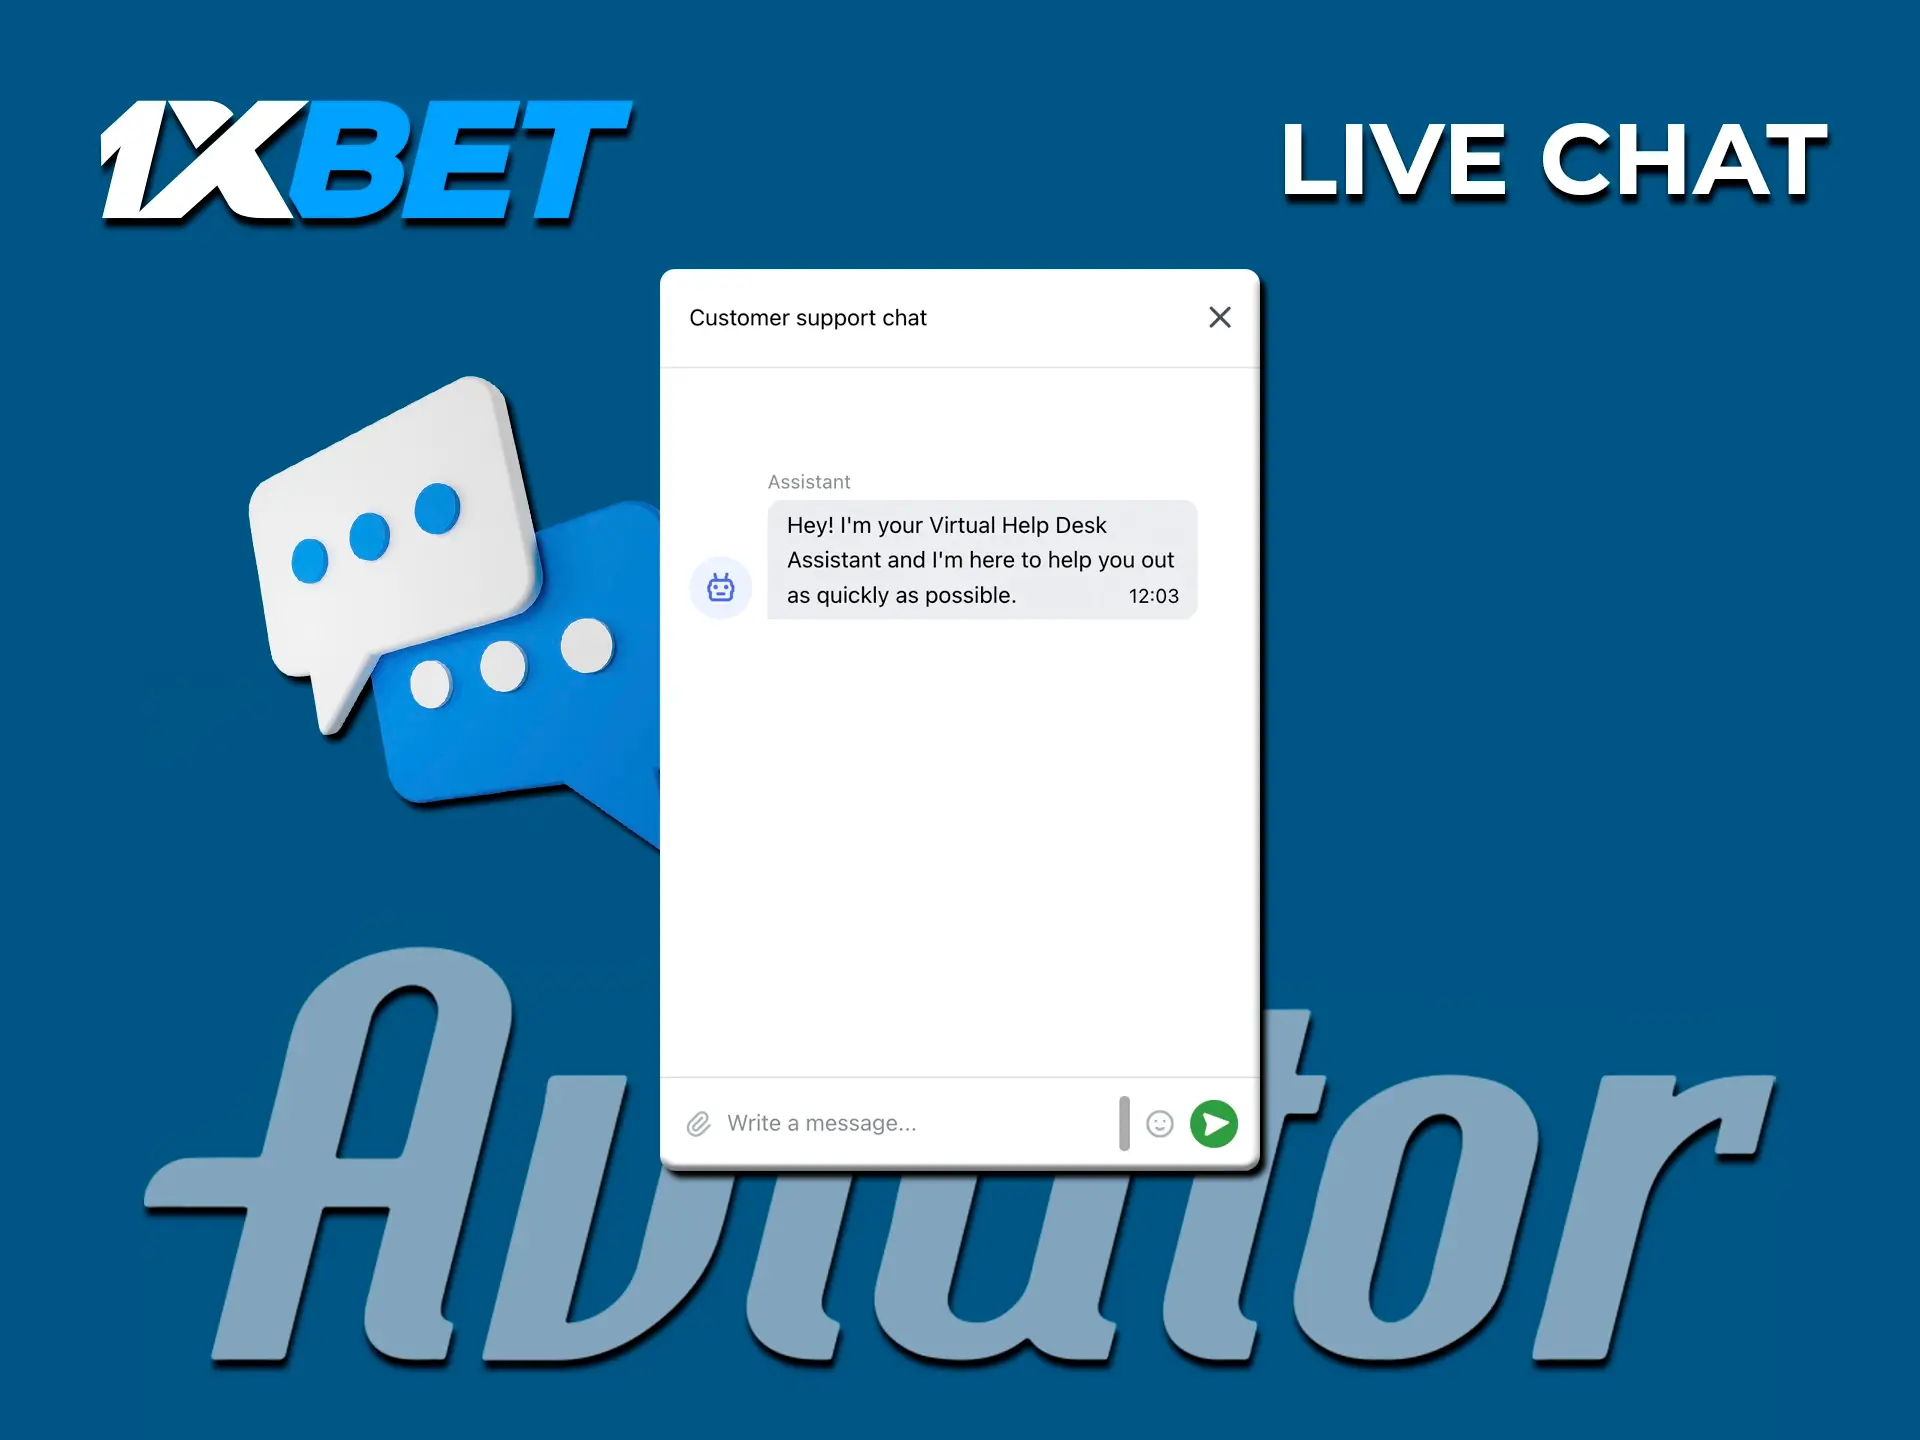 In case you have any questions, you can contact 1xBet's 24/7 support chat.